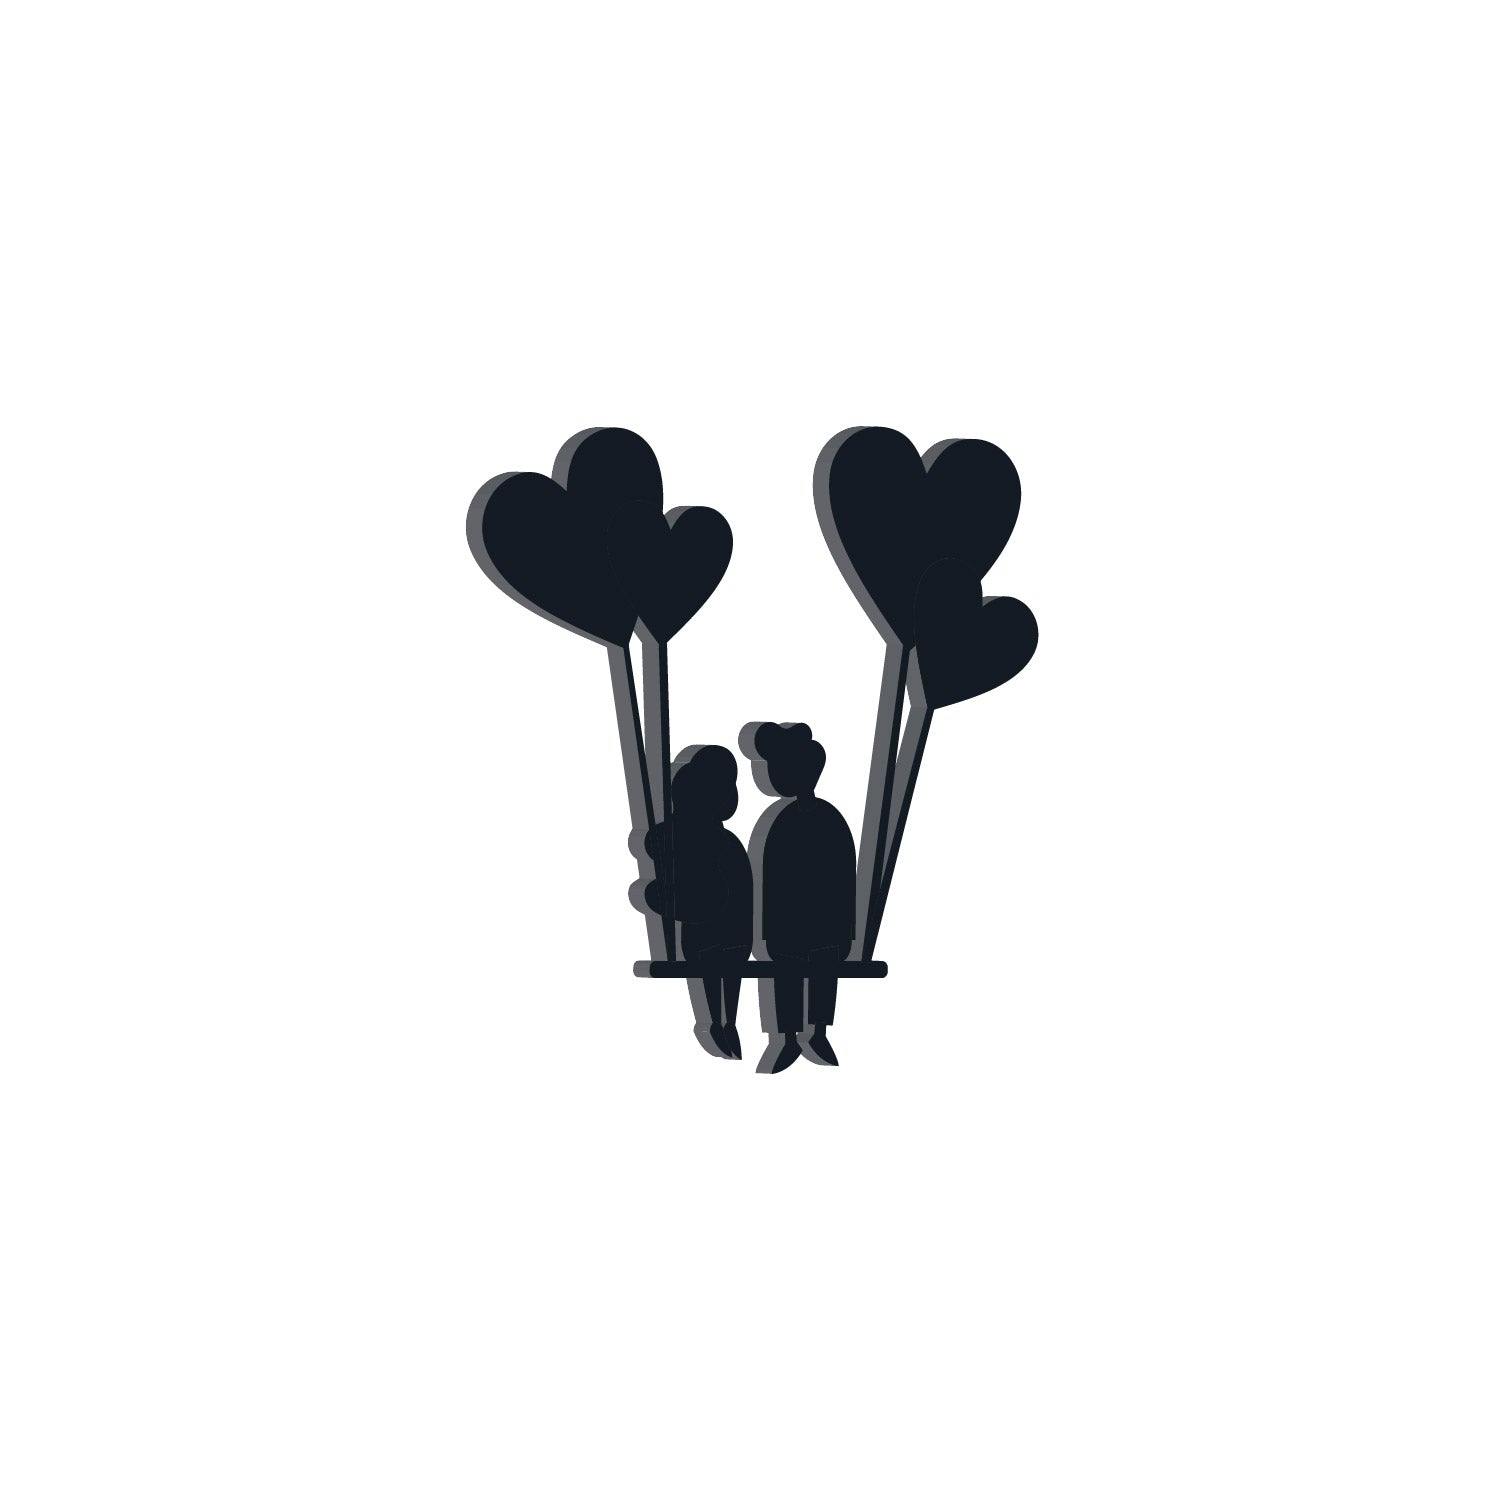 Young Loving Couple with Hearts Balloons Black Engineered Wood Wall Art Cutout, Ready to Hang Home Decor 4